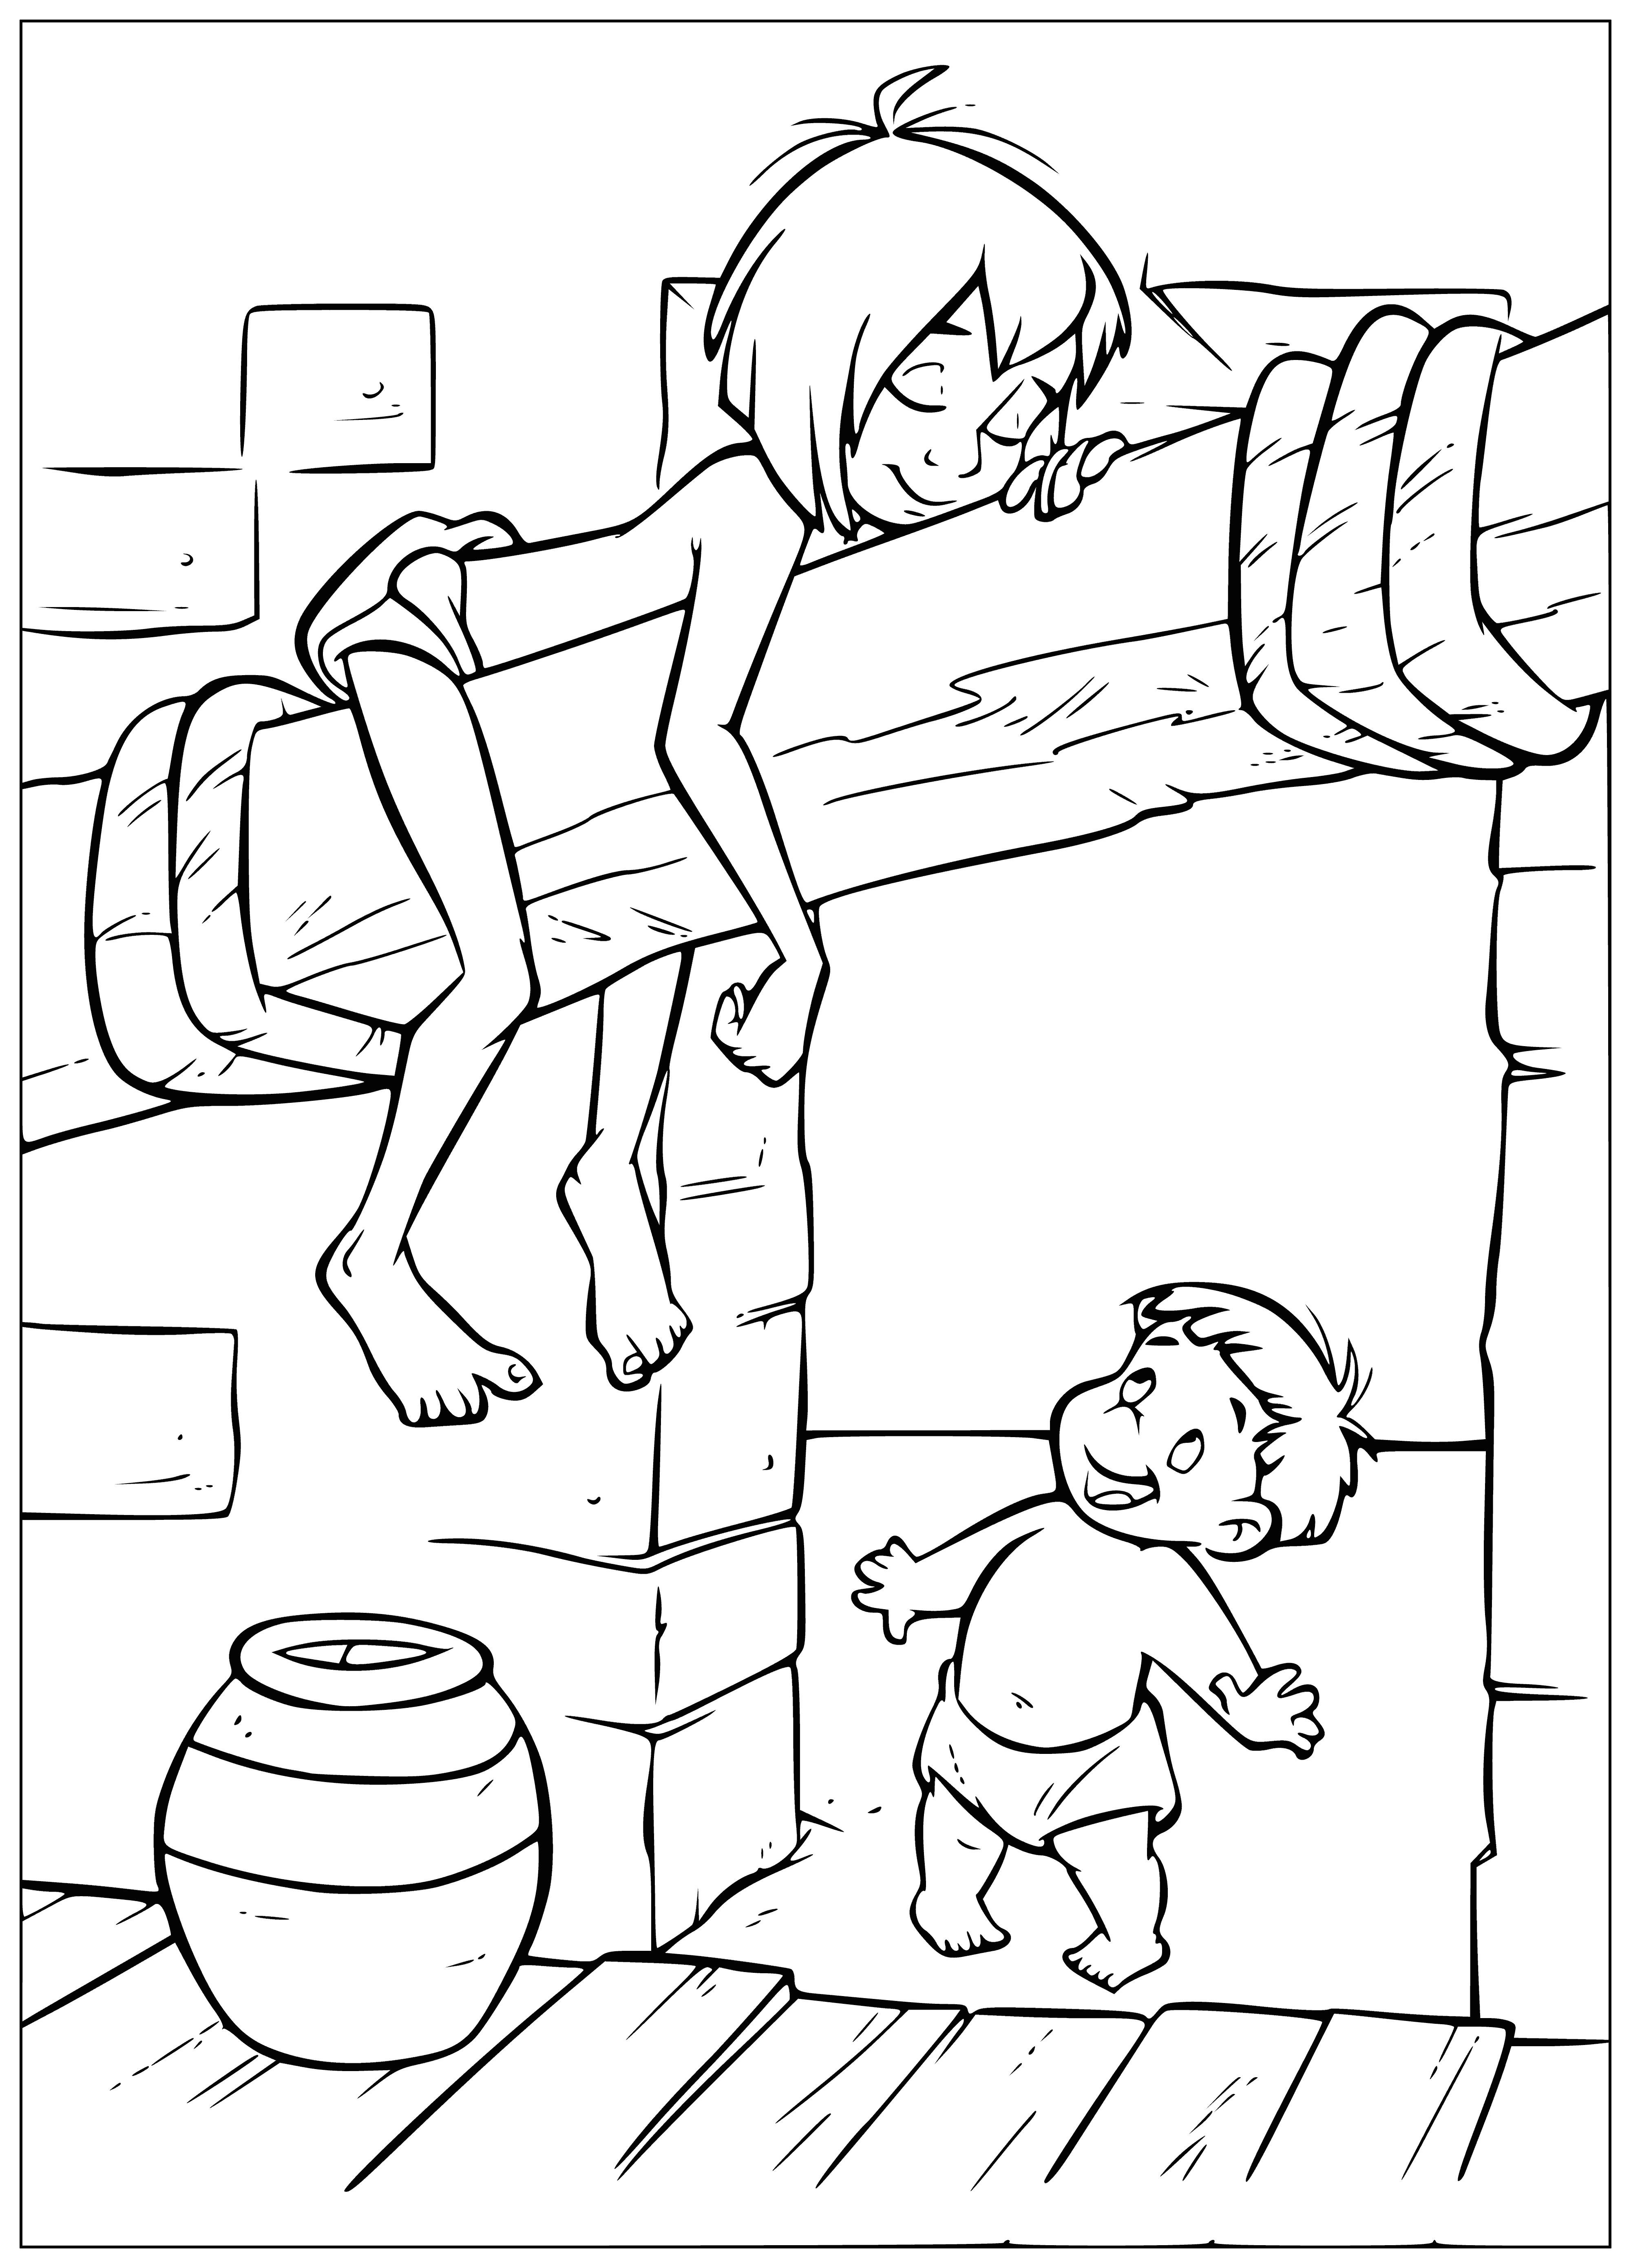 Mowgli and the baby coloring page